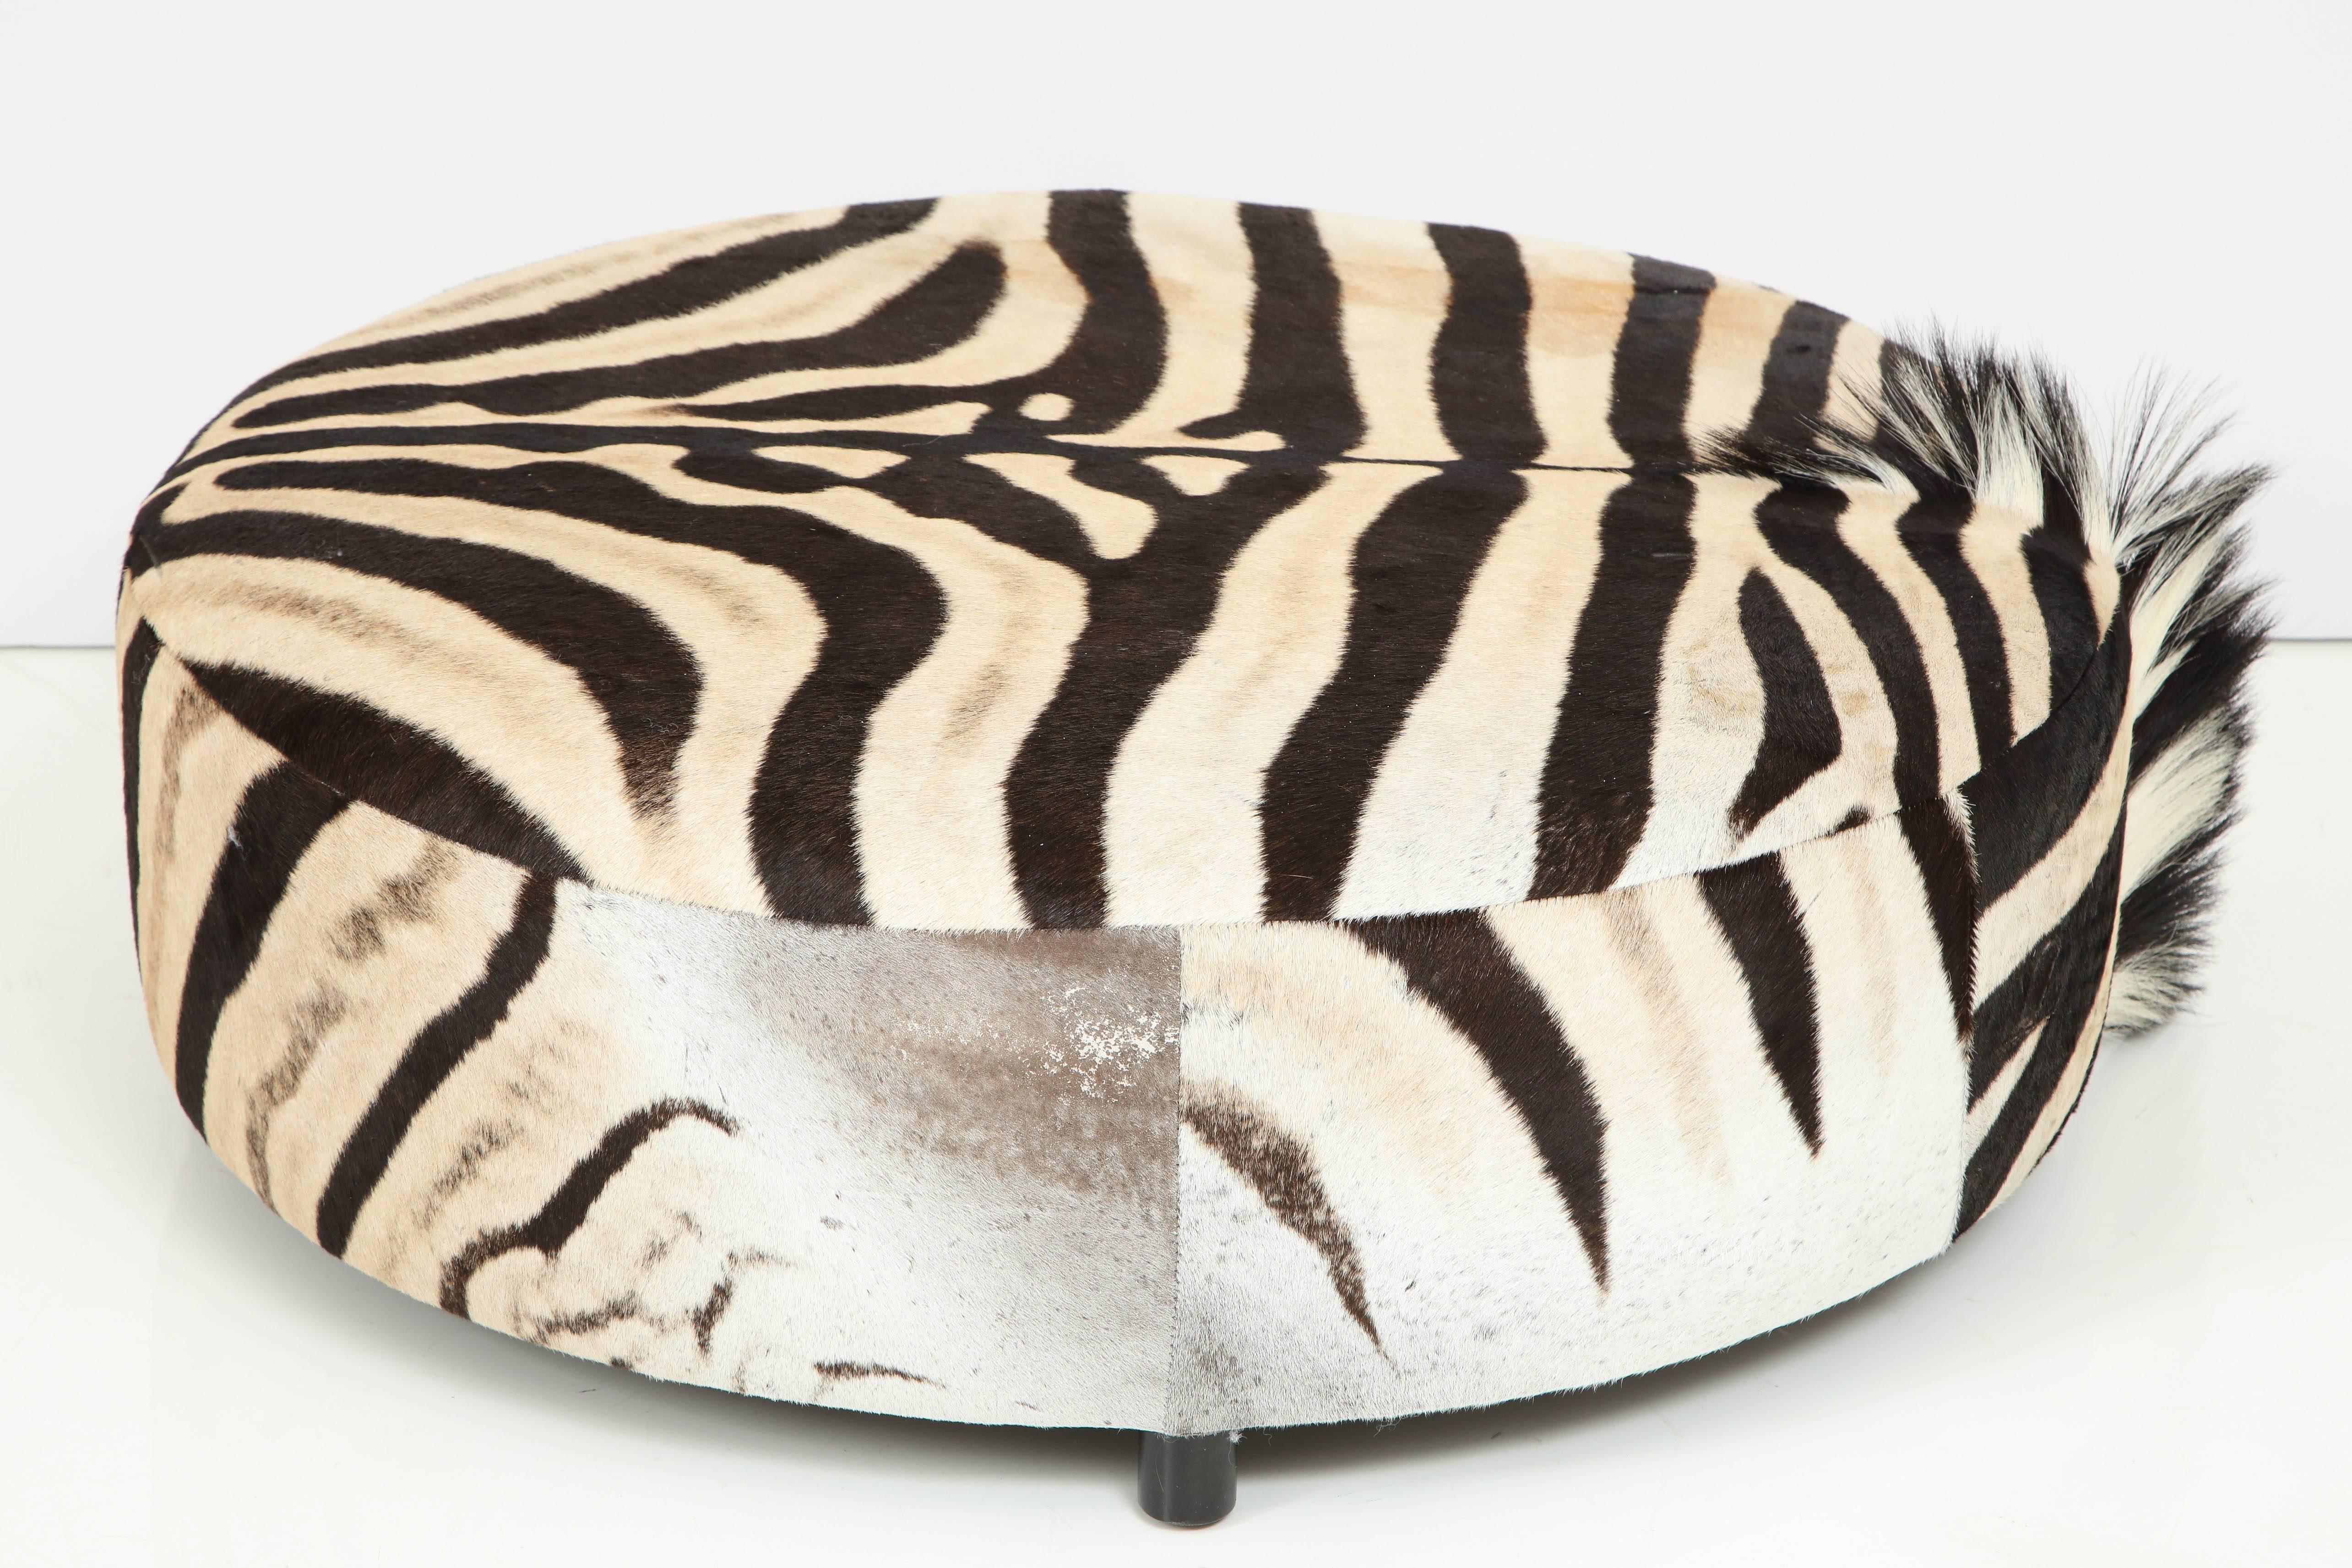 Decorative round zebra hide ottoman. Beautifully showing of the man on one side.
Dark chocolate colored round wood legs.